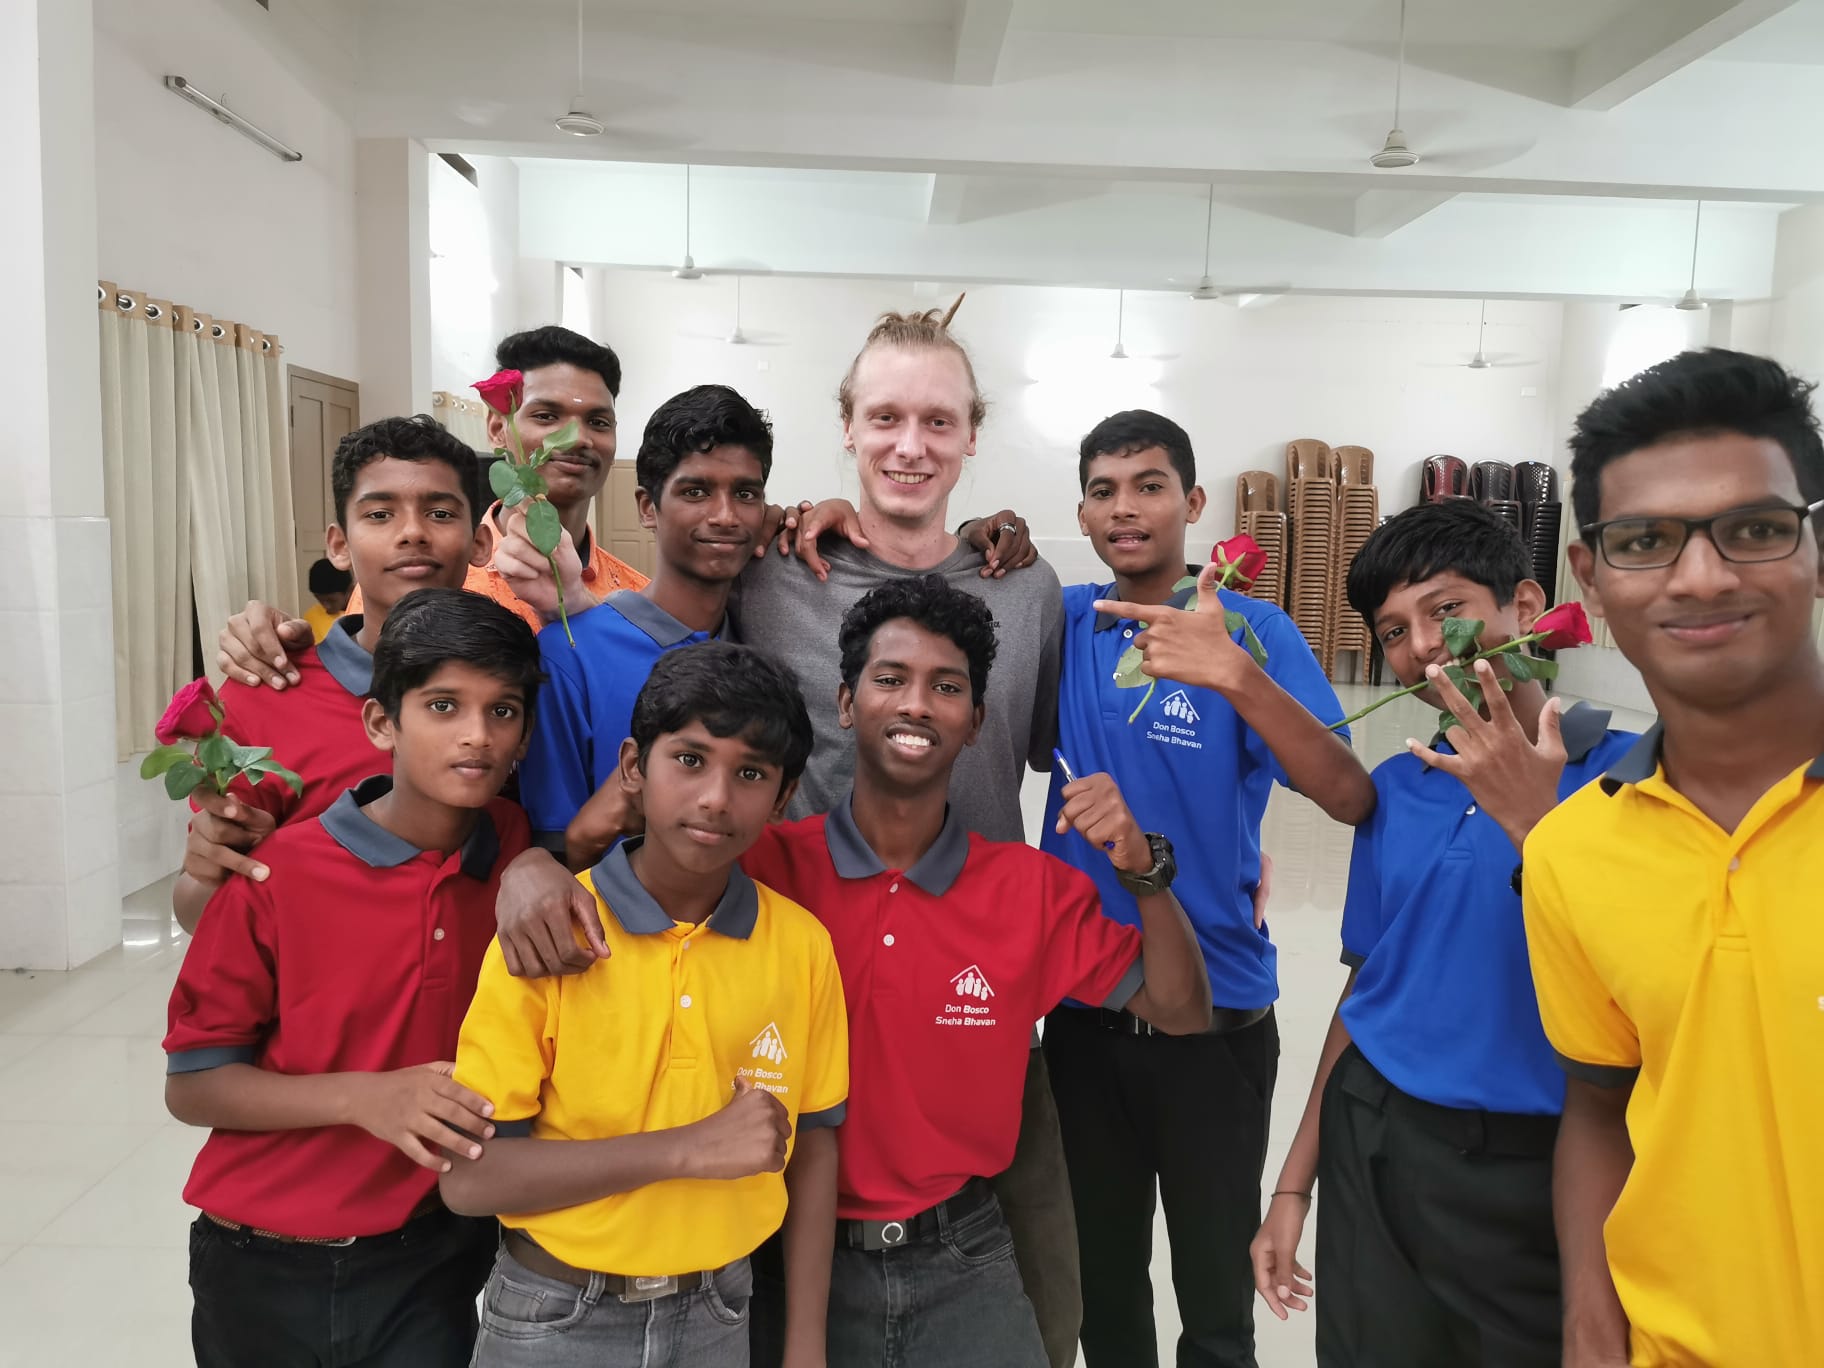 Read about a volunteer from Germany who shares his inspiring experience working with underprivileged kids at Don Bosco. Discover the transformative impact of volunteering and how it can make a difference in the lives of others.